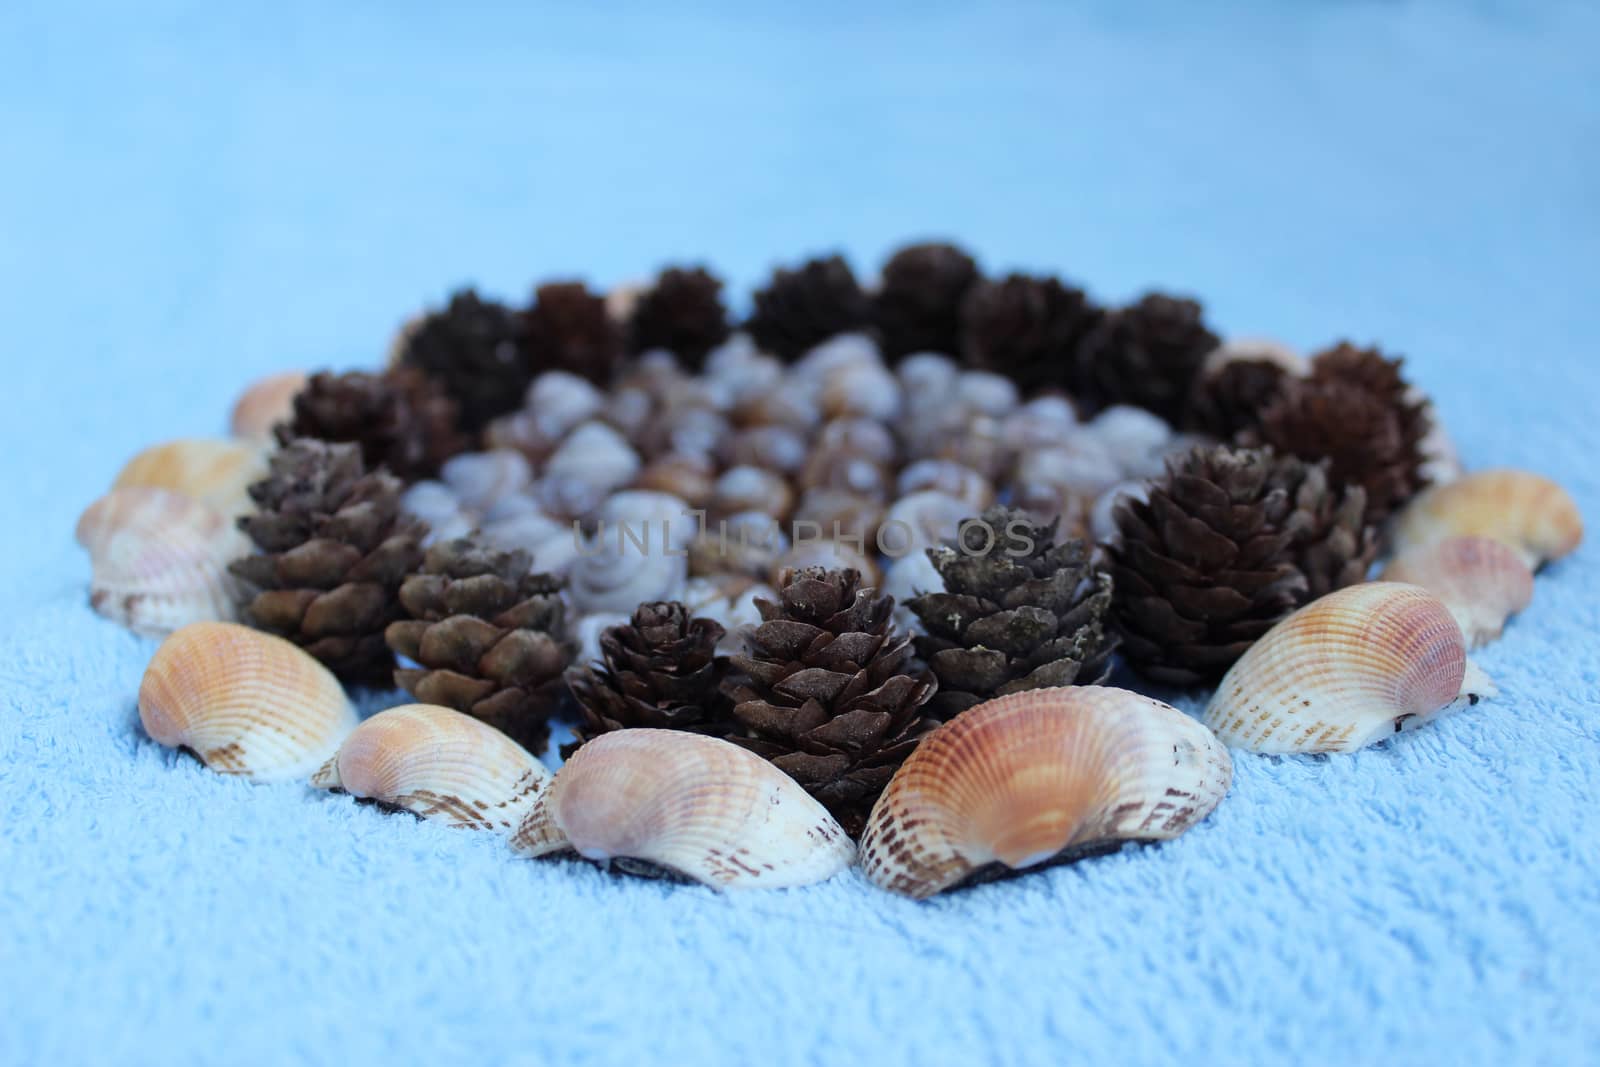 Decoration made of natural material: shells of snails found in the Gatchina park, pine cones from Karelia and seashells from Arabian Sea on a blue background